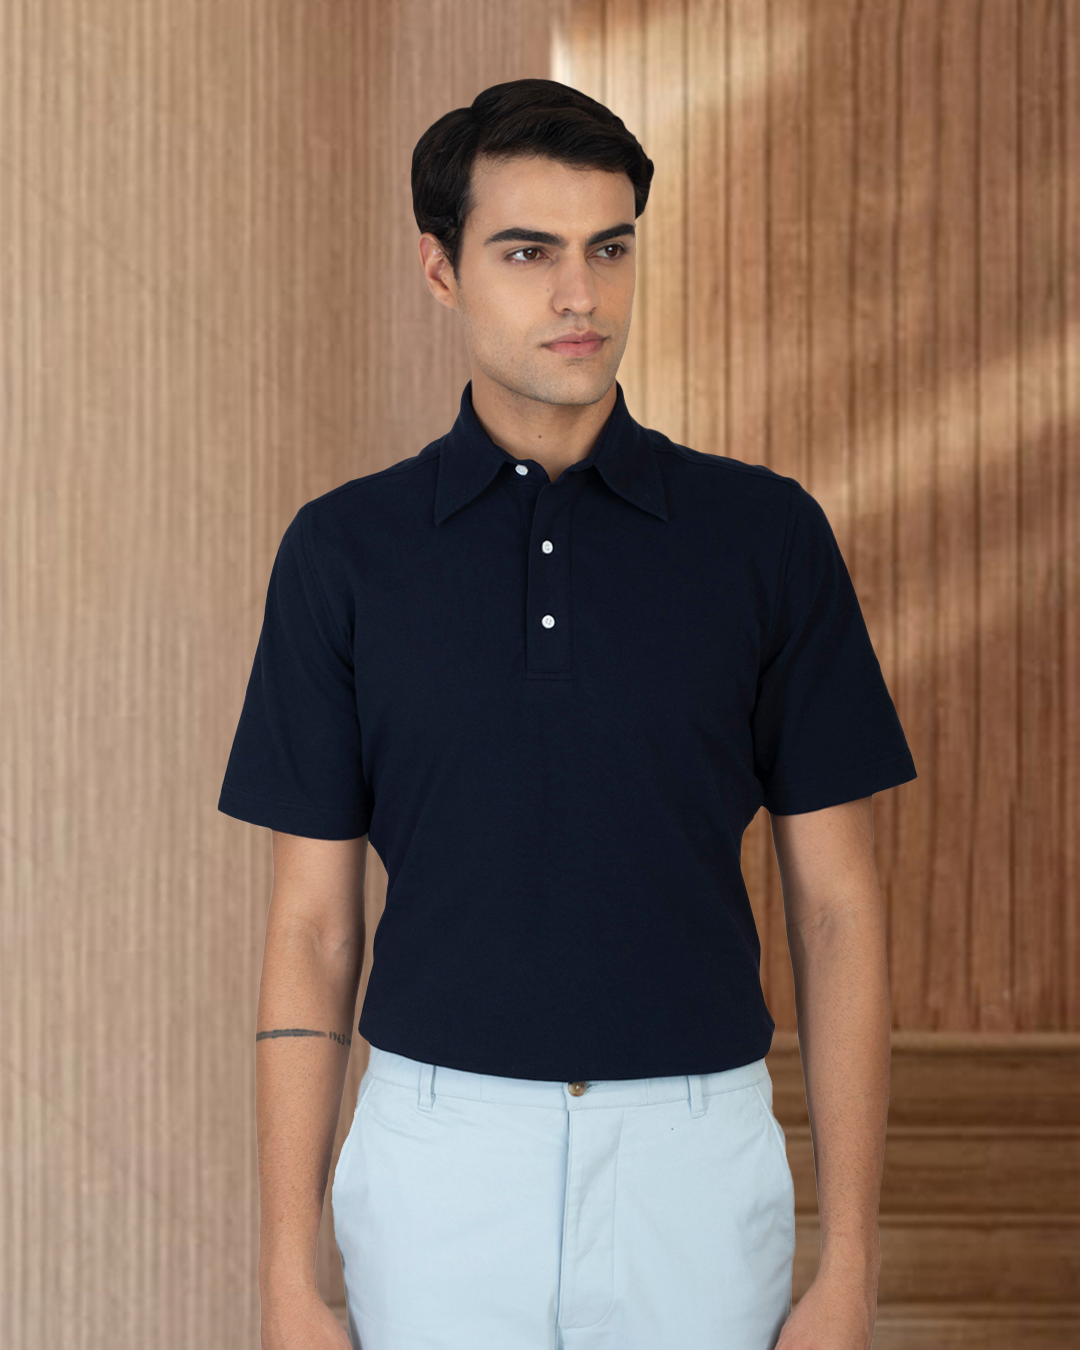 Model wearing the custom oxford polo shirt for men by Luxire in navy with white pants